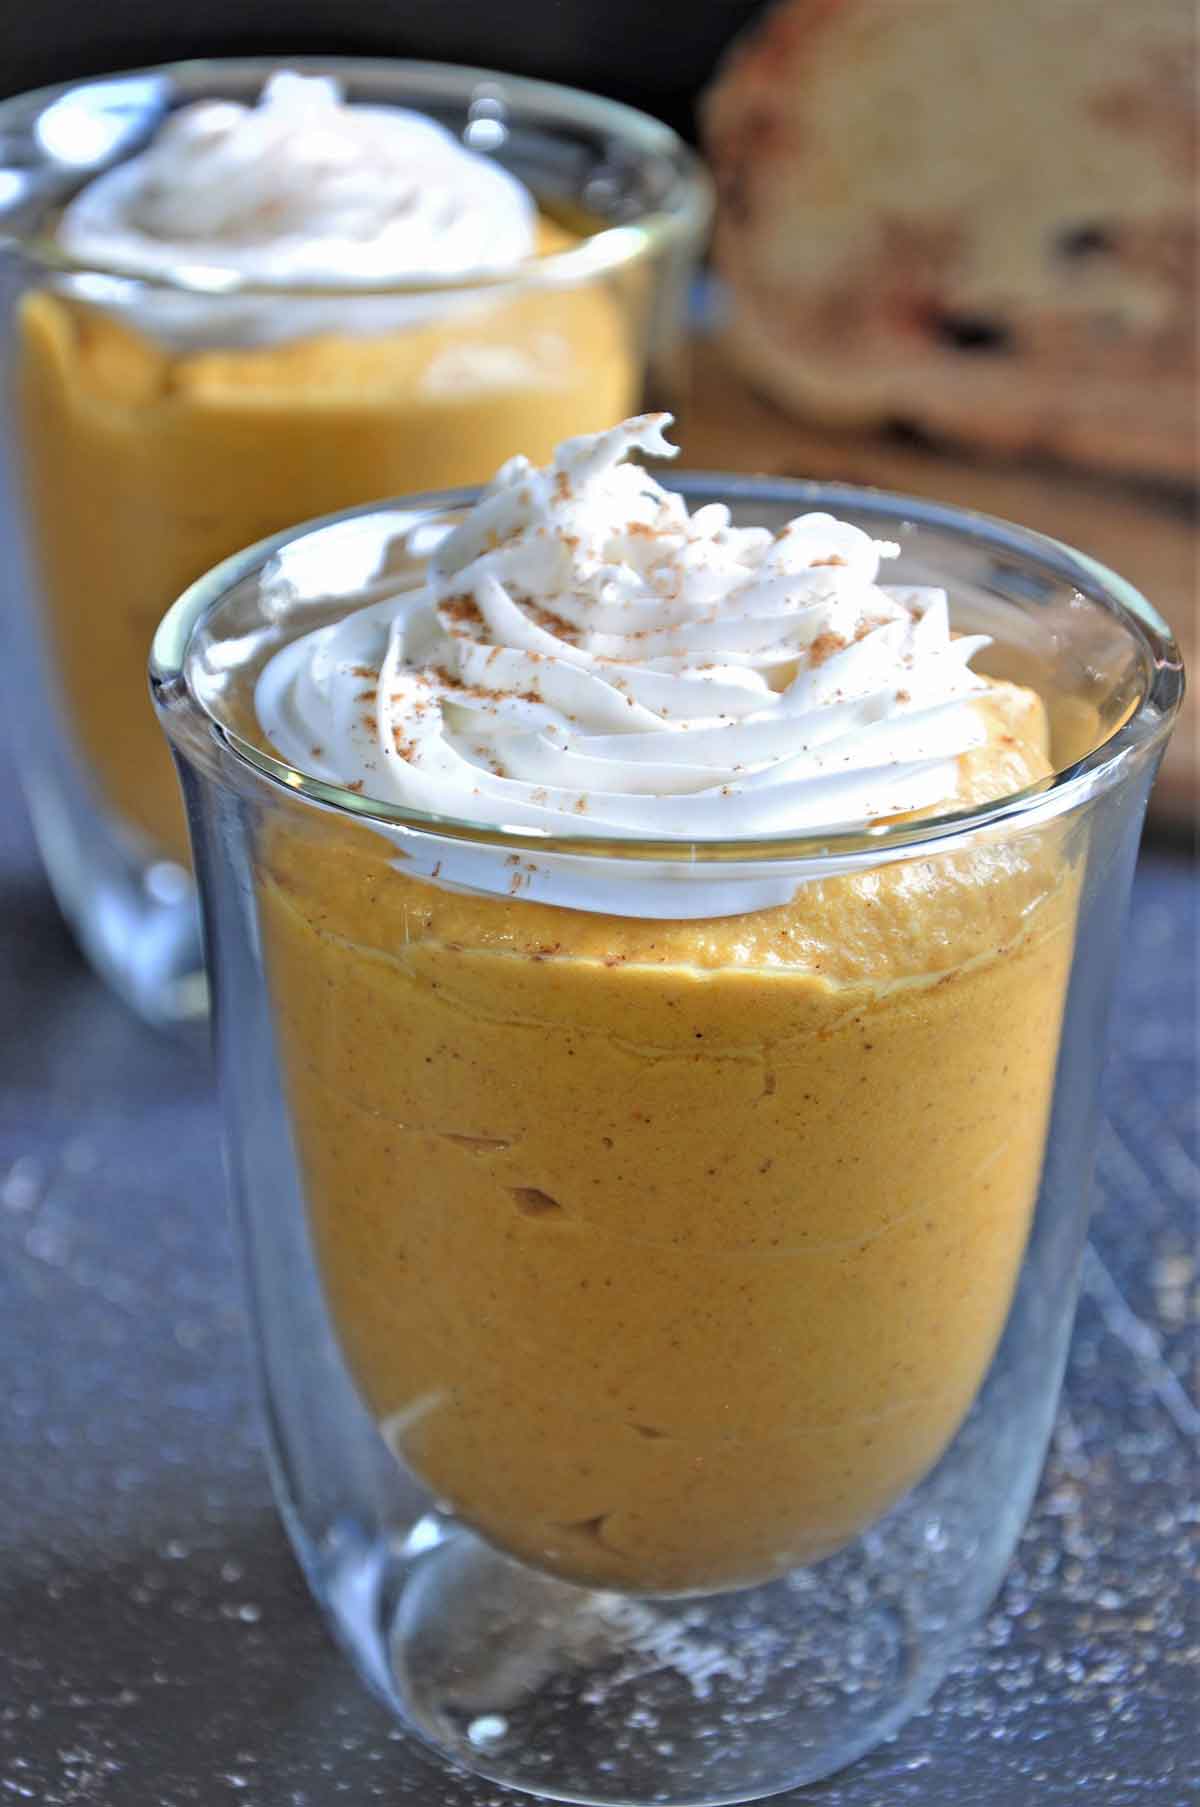 Pumpkin mousse with cream topping in a small serving glass.